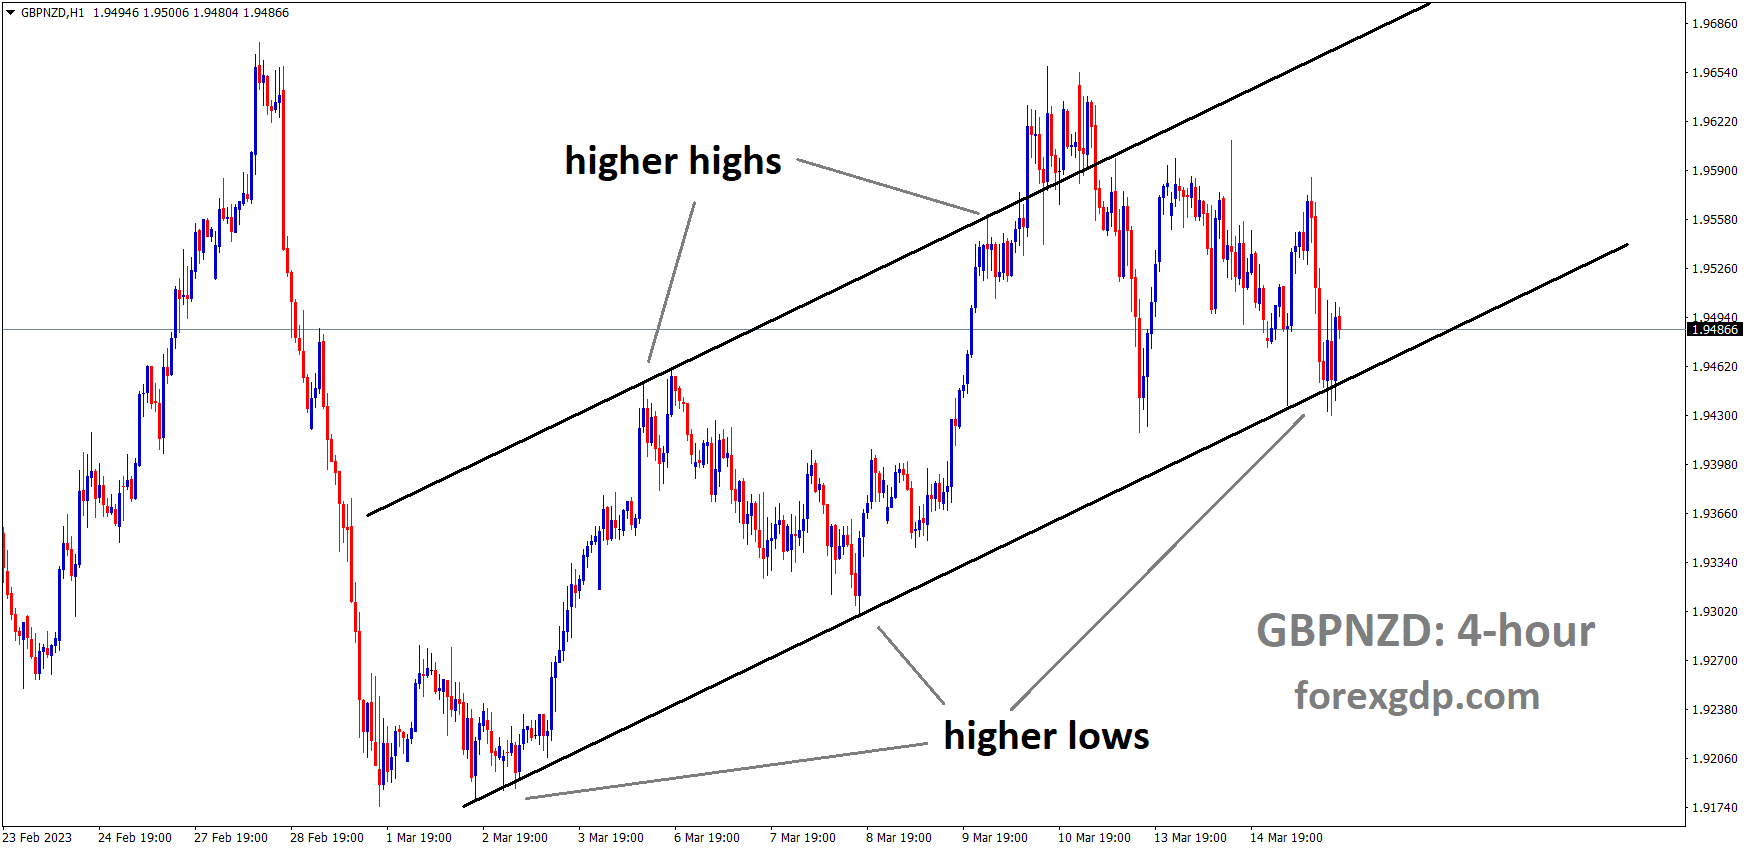 GBPNZD H1 TF analysis Market is moving in an Ascending channel and the market has rebounded from the higher low area of the channel